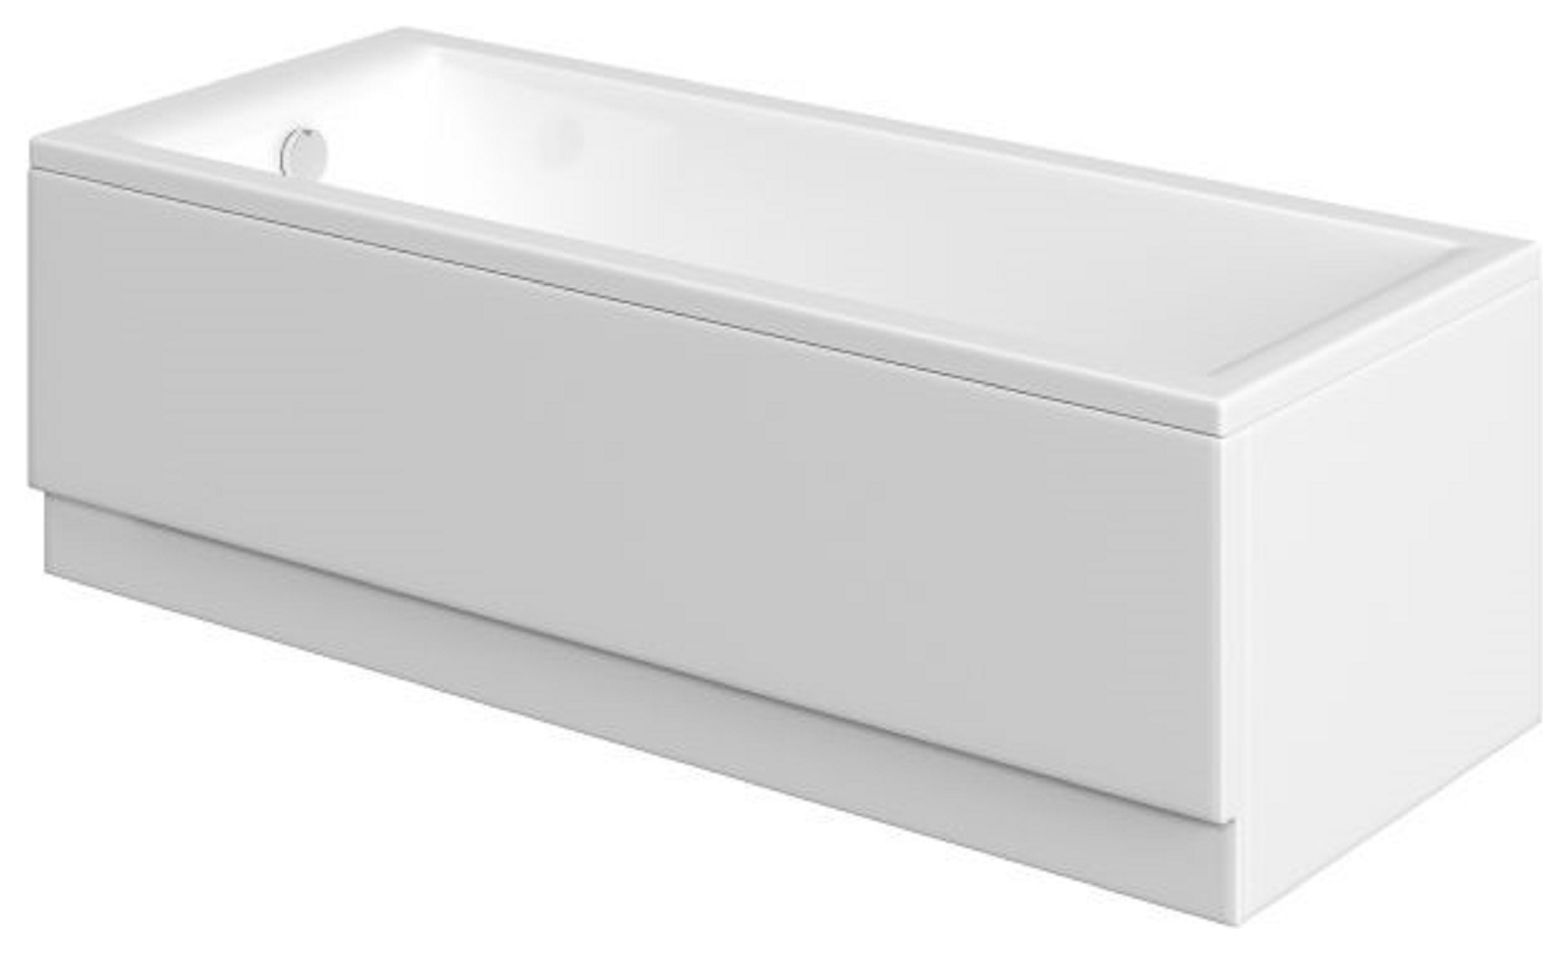 Image of Wickes Camisa Single Ended Straight Bath - 1600 x 700mm